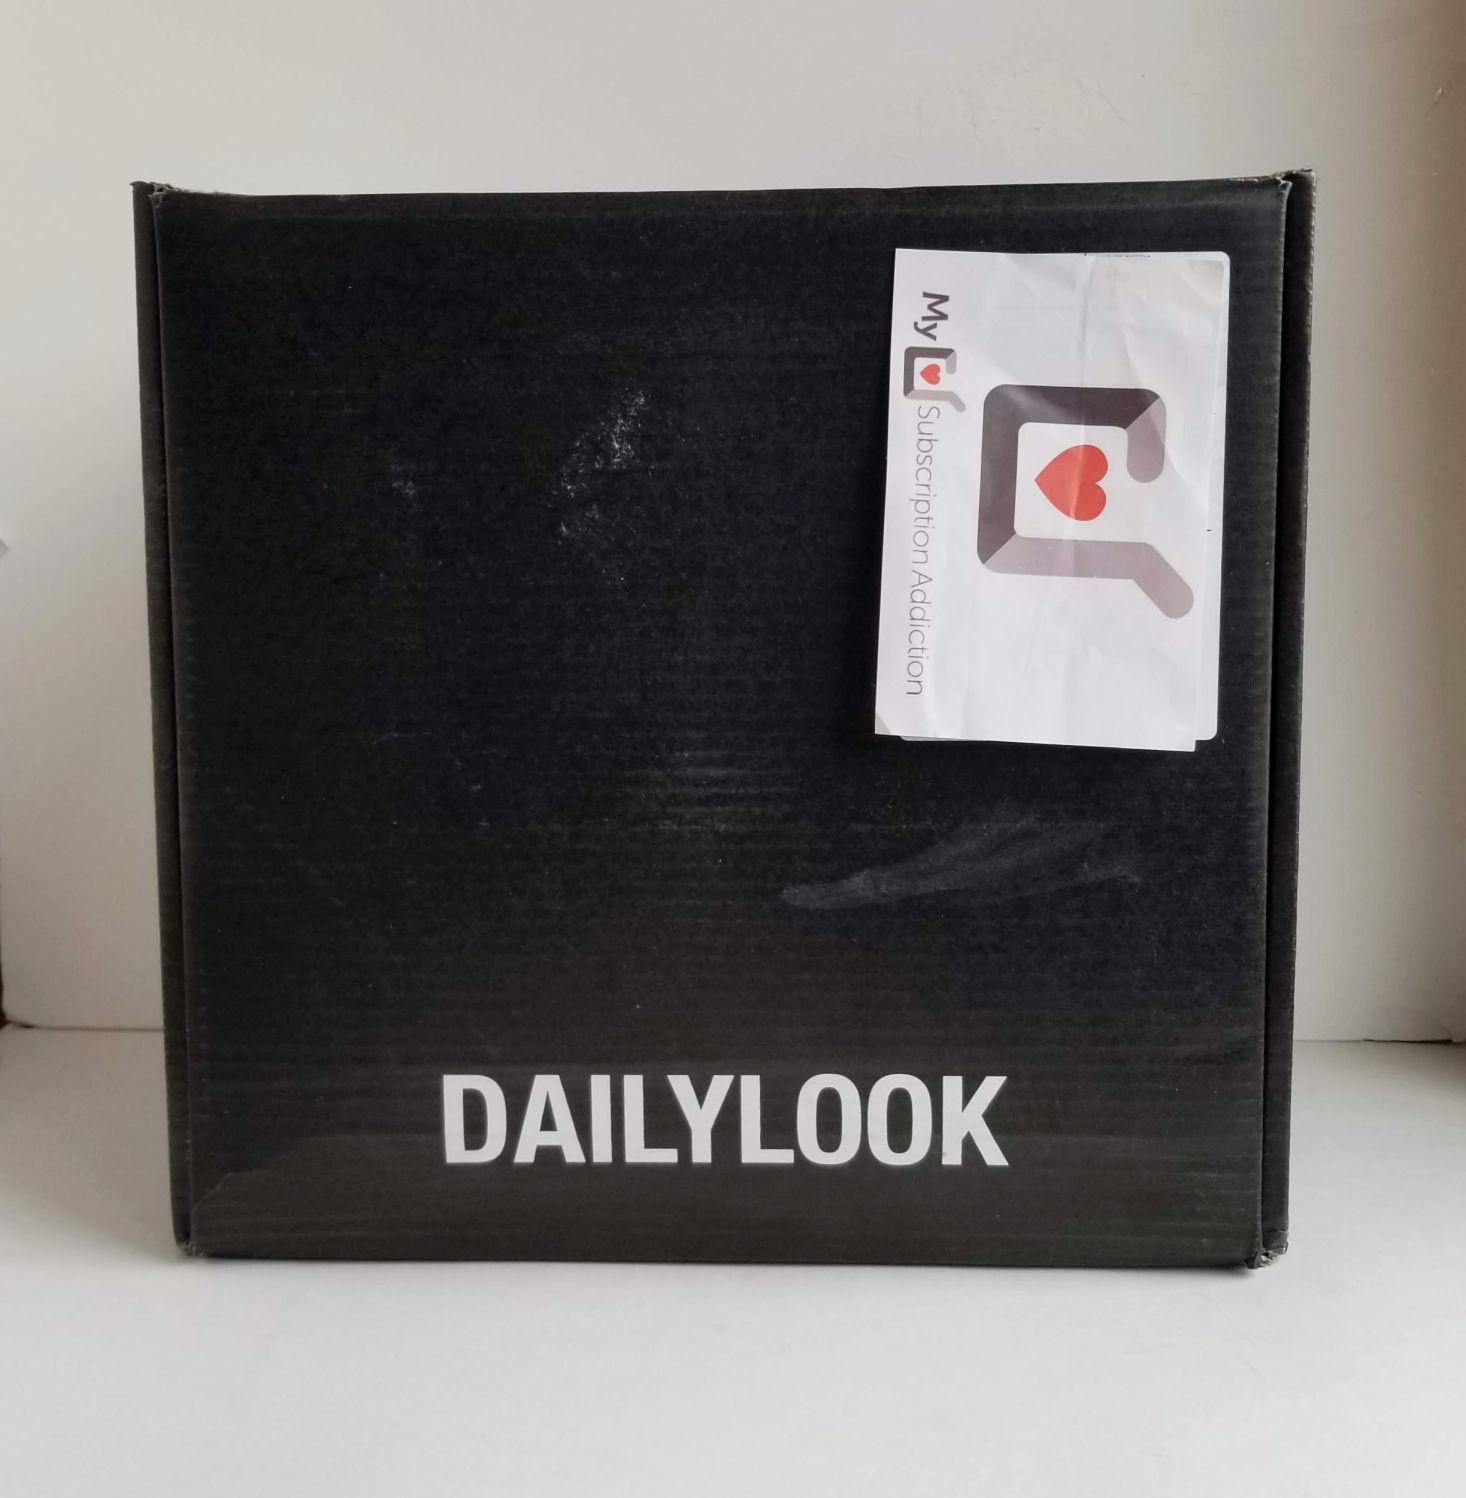 DAILYLOOK Clothing Subscription Review + Coupon – February 2019